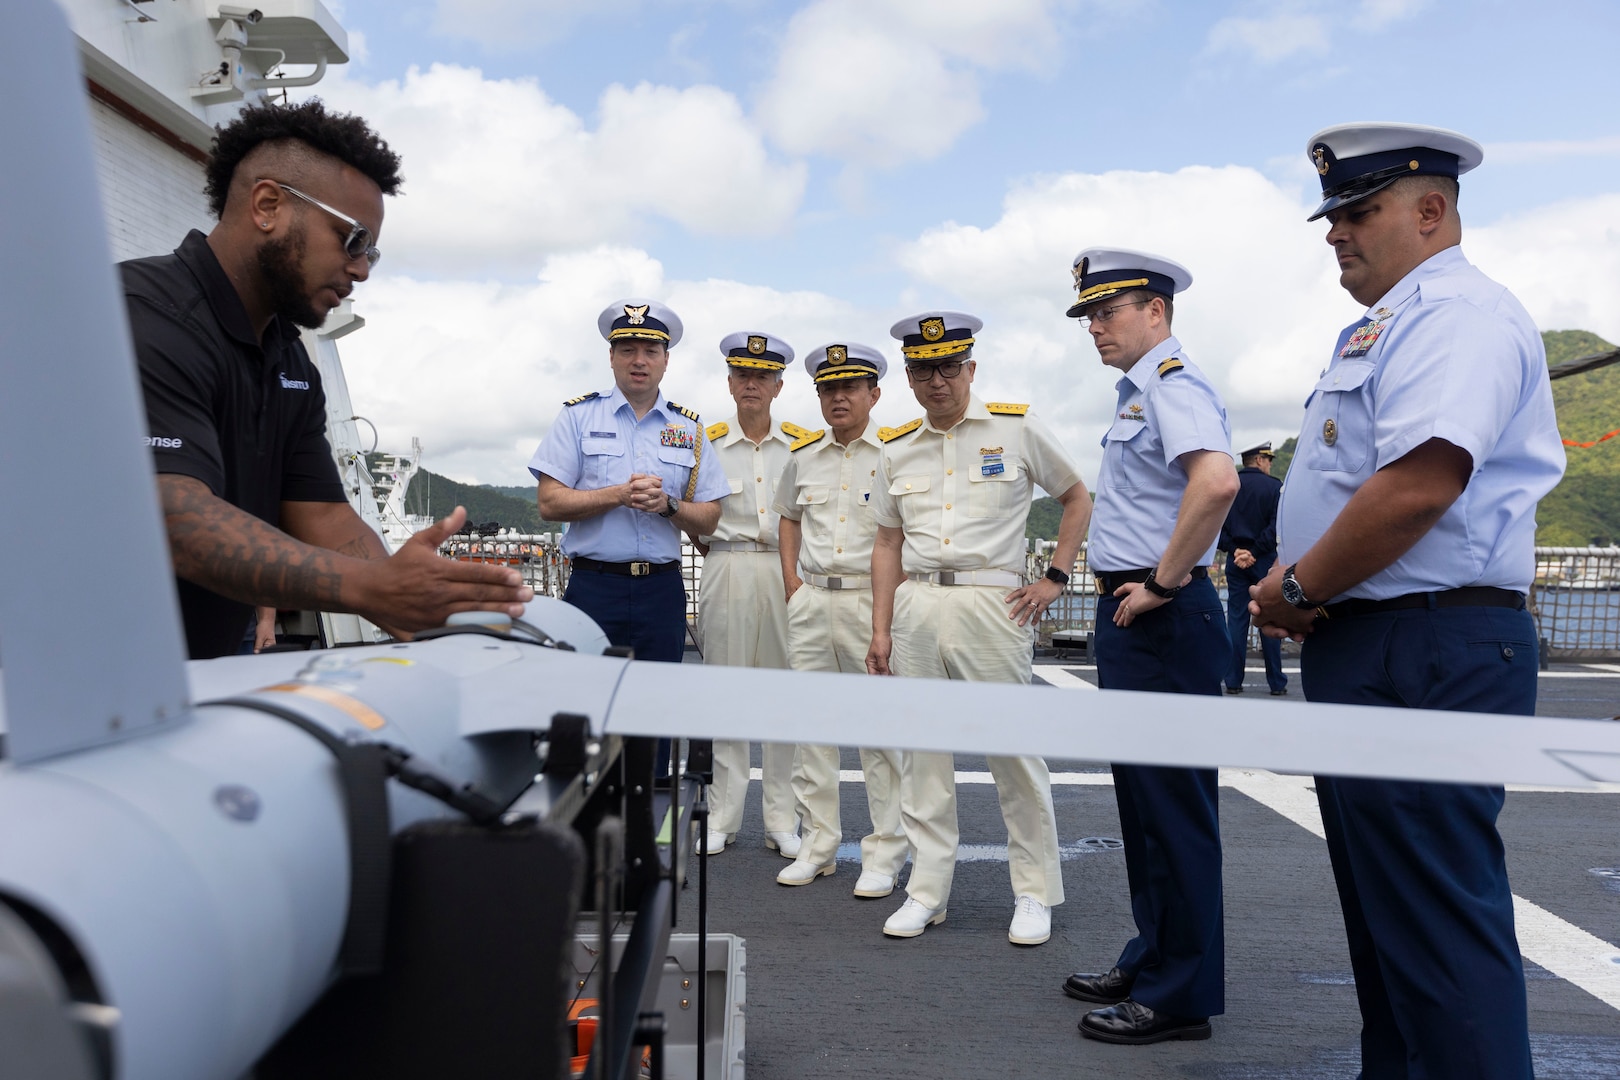 Christopher Lee, an operator of the ScanEagle small unmanned aerial system (UAS), working aboard the U.S. Coast Guard Cutter Waesche (WMSL-751), explains the role of UAS to leaders in the Japan Coast Guard during a tour of the Waesche in Maizuru, Japan, June 5, 2024. Members of the Japan and Republic of Korea Coast Guards toured the Waesche to see the capabilities the U.S. Coast Guard has to handle its mission sets. U.S. Coast Guard missions in the Indo-Pacific focus on issues directly supporting and advancing our regional partners’ efforts to protect fish stocks, ensure safety of life at sea, support environmental response, and provide disaster relief. (U.S. Marine Corps photo by Cpl. Elijah Murphy)